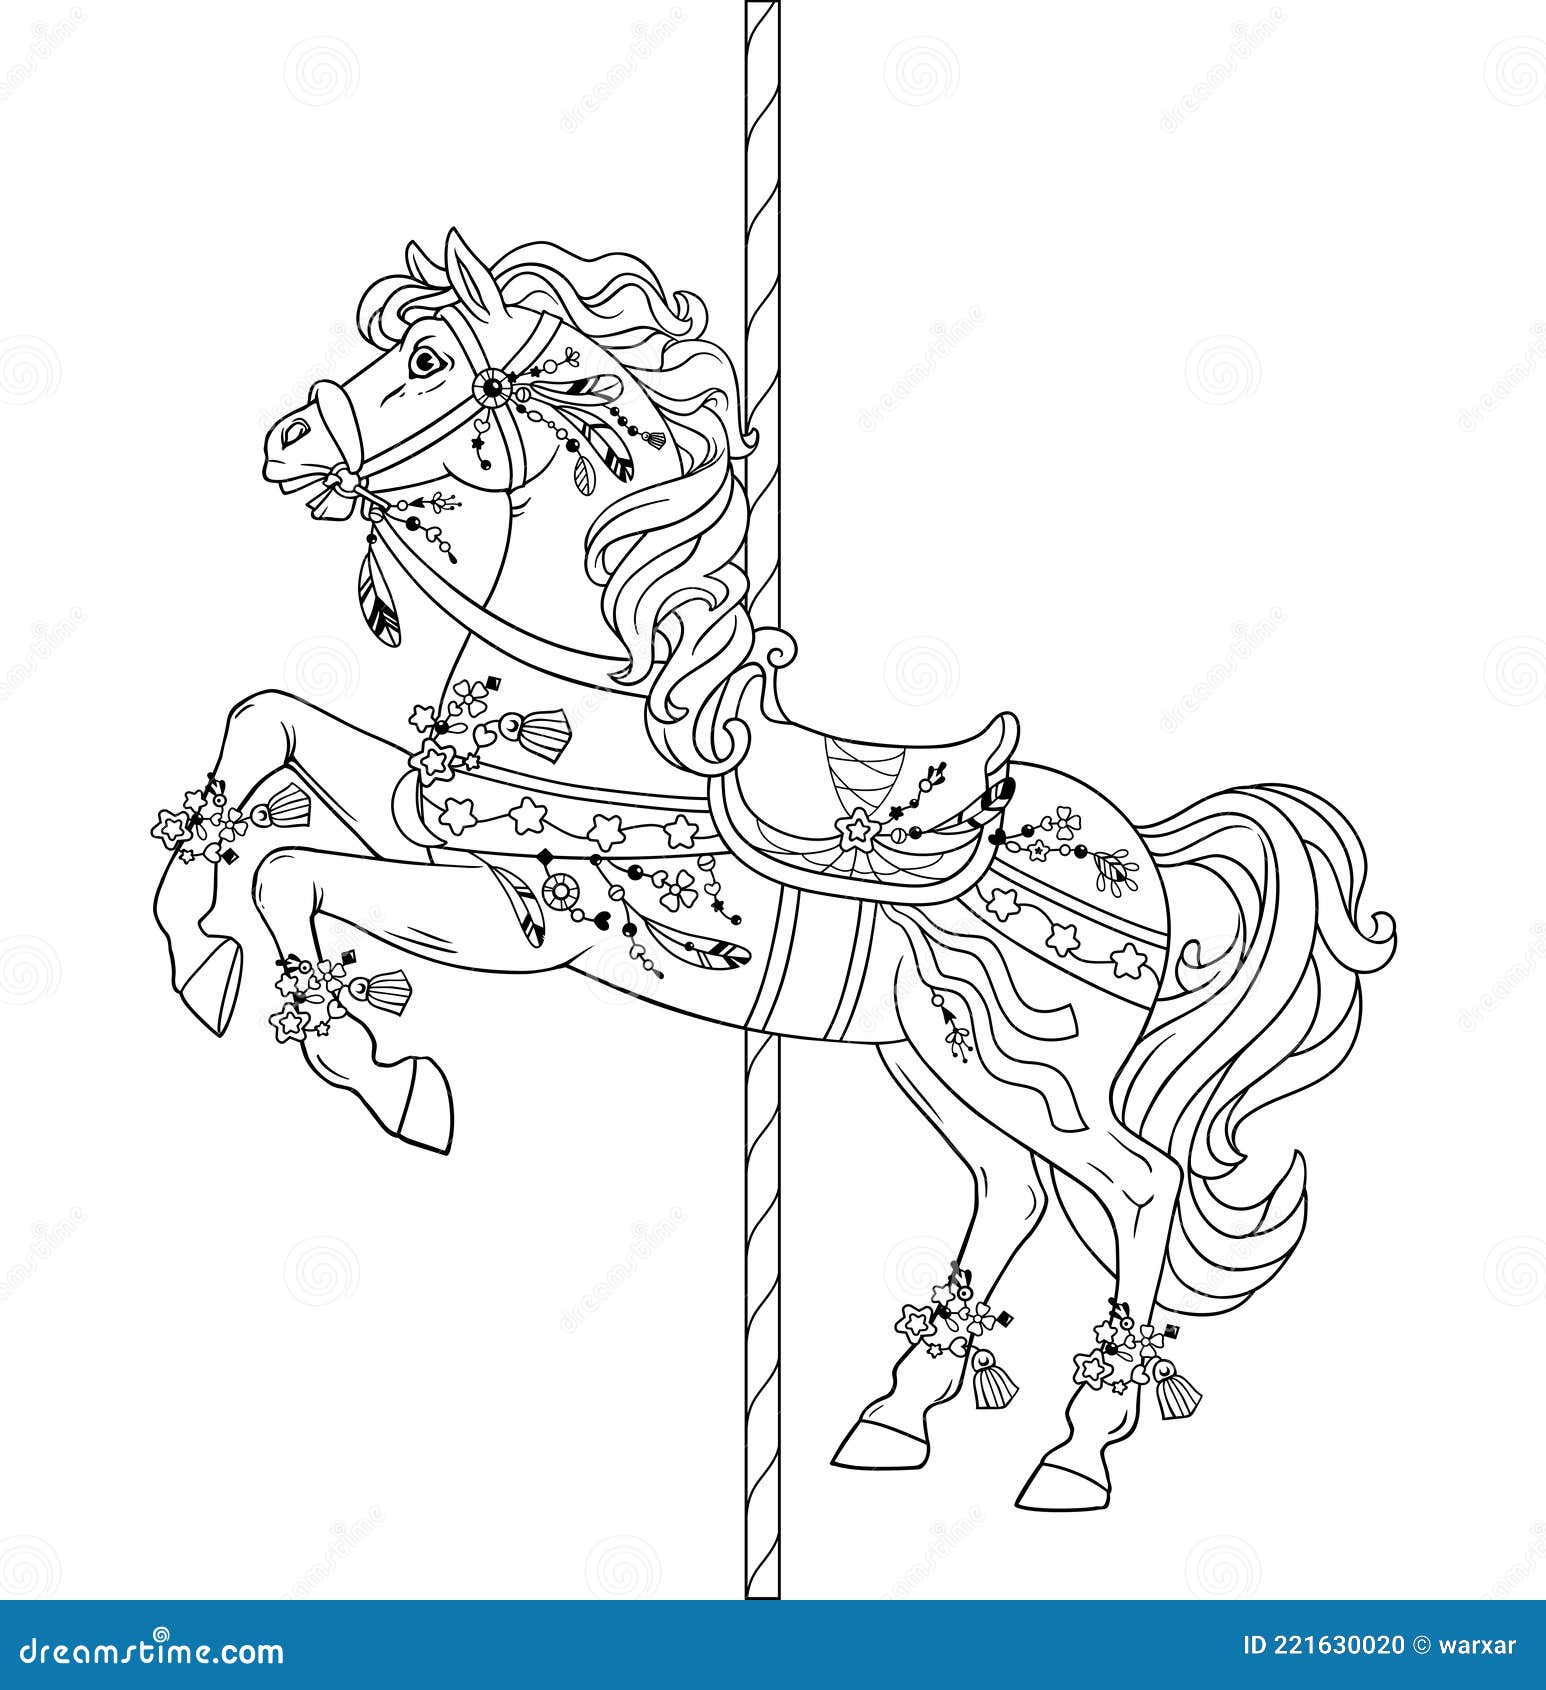 Carousel Coloring Page Stock Illustrations – 20 Carousel Coloring ...